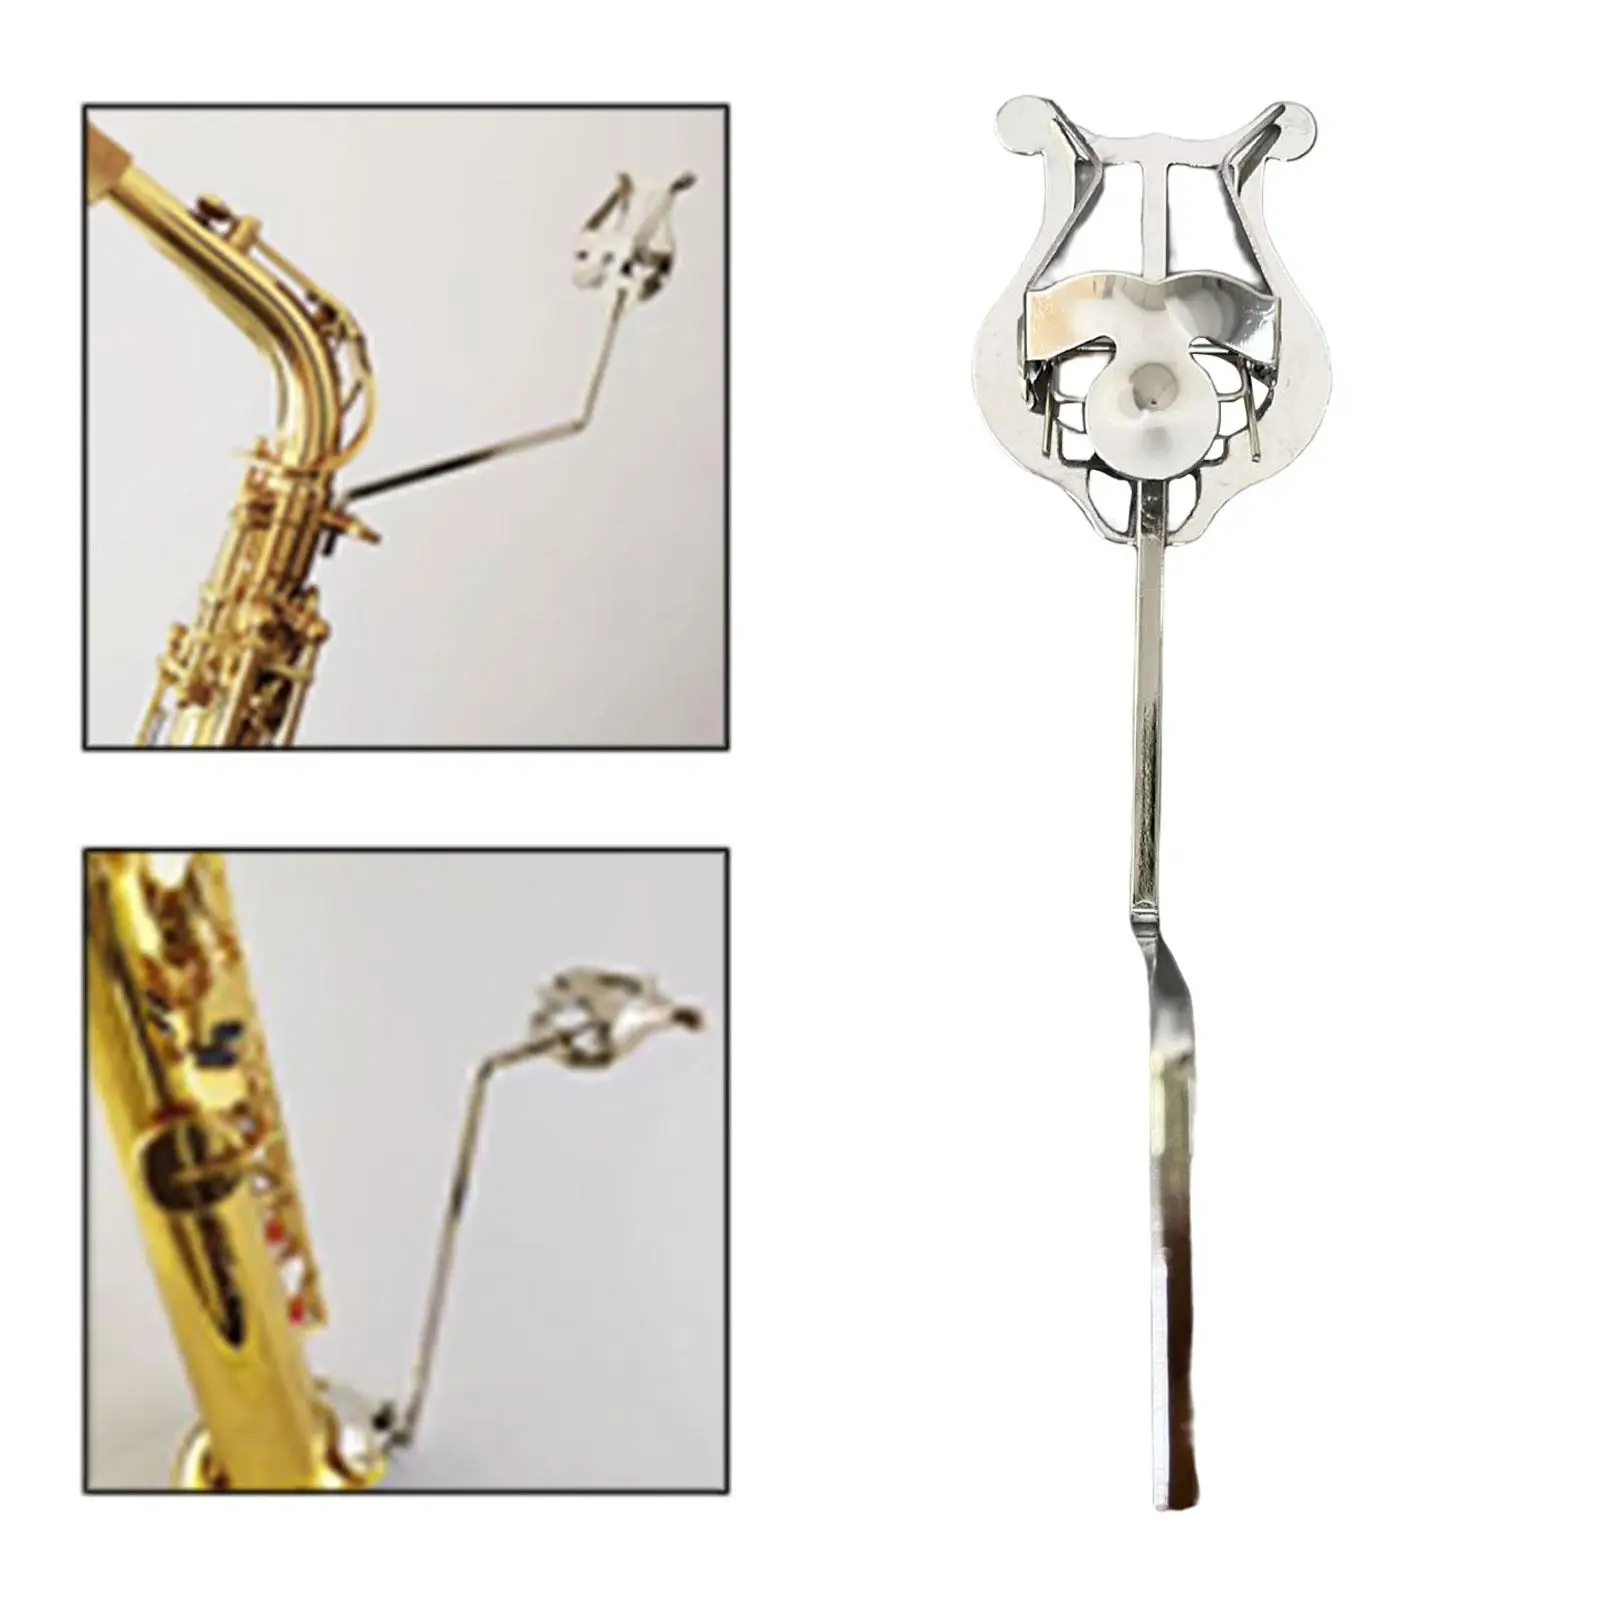 Portable Marching Lyre Clamp Lyre Sheet Music Clip Trumpet Marching Clamp Holder for Sax